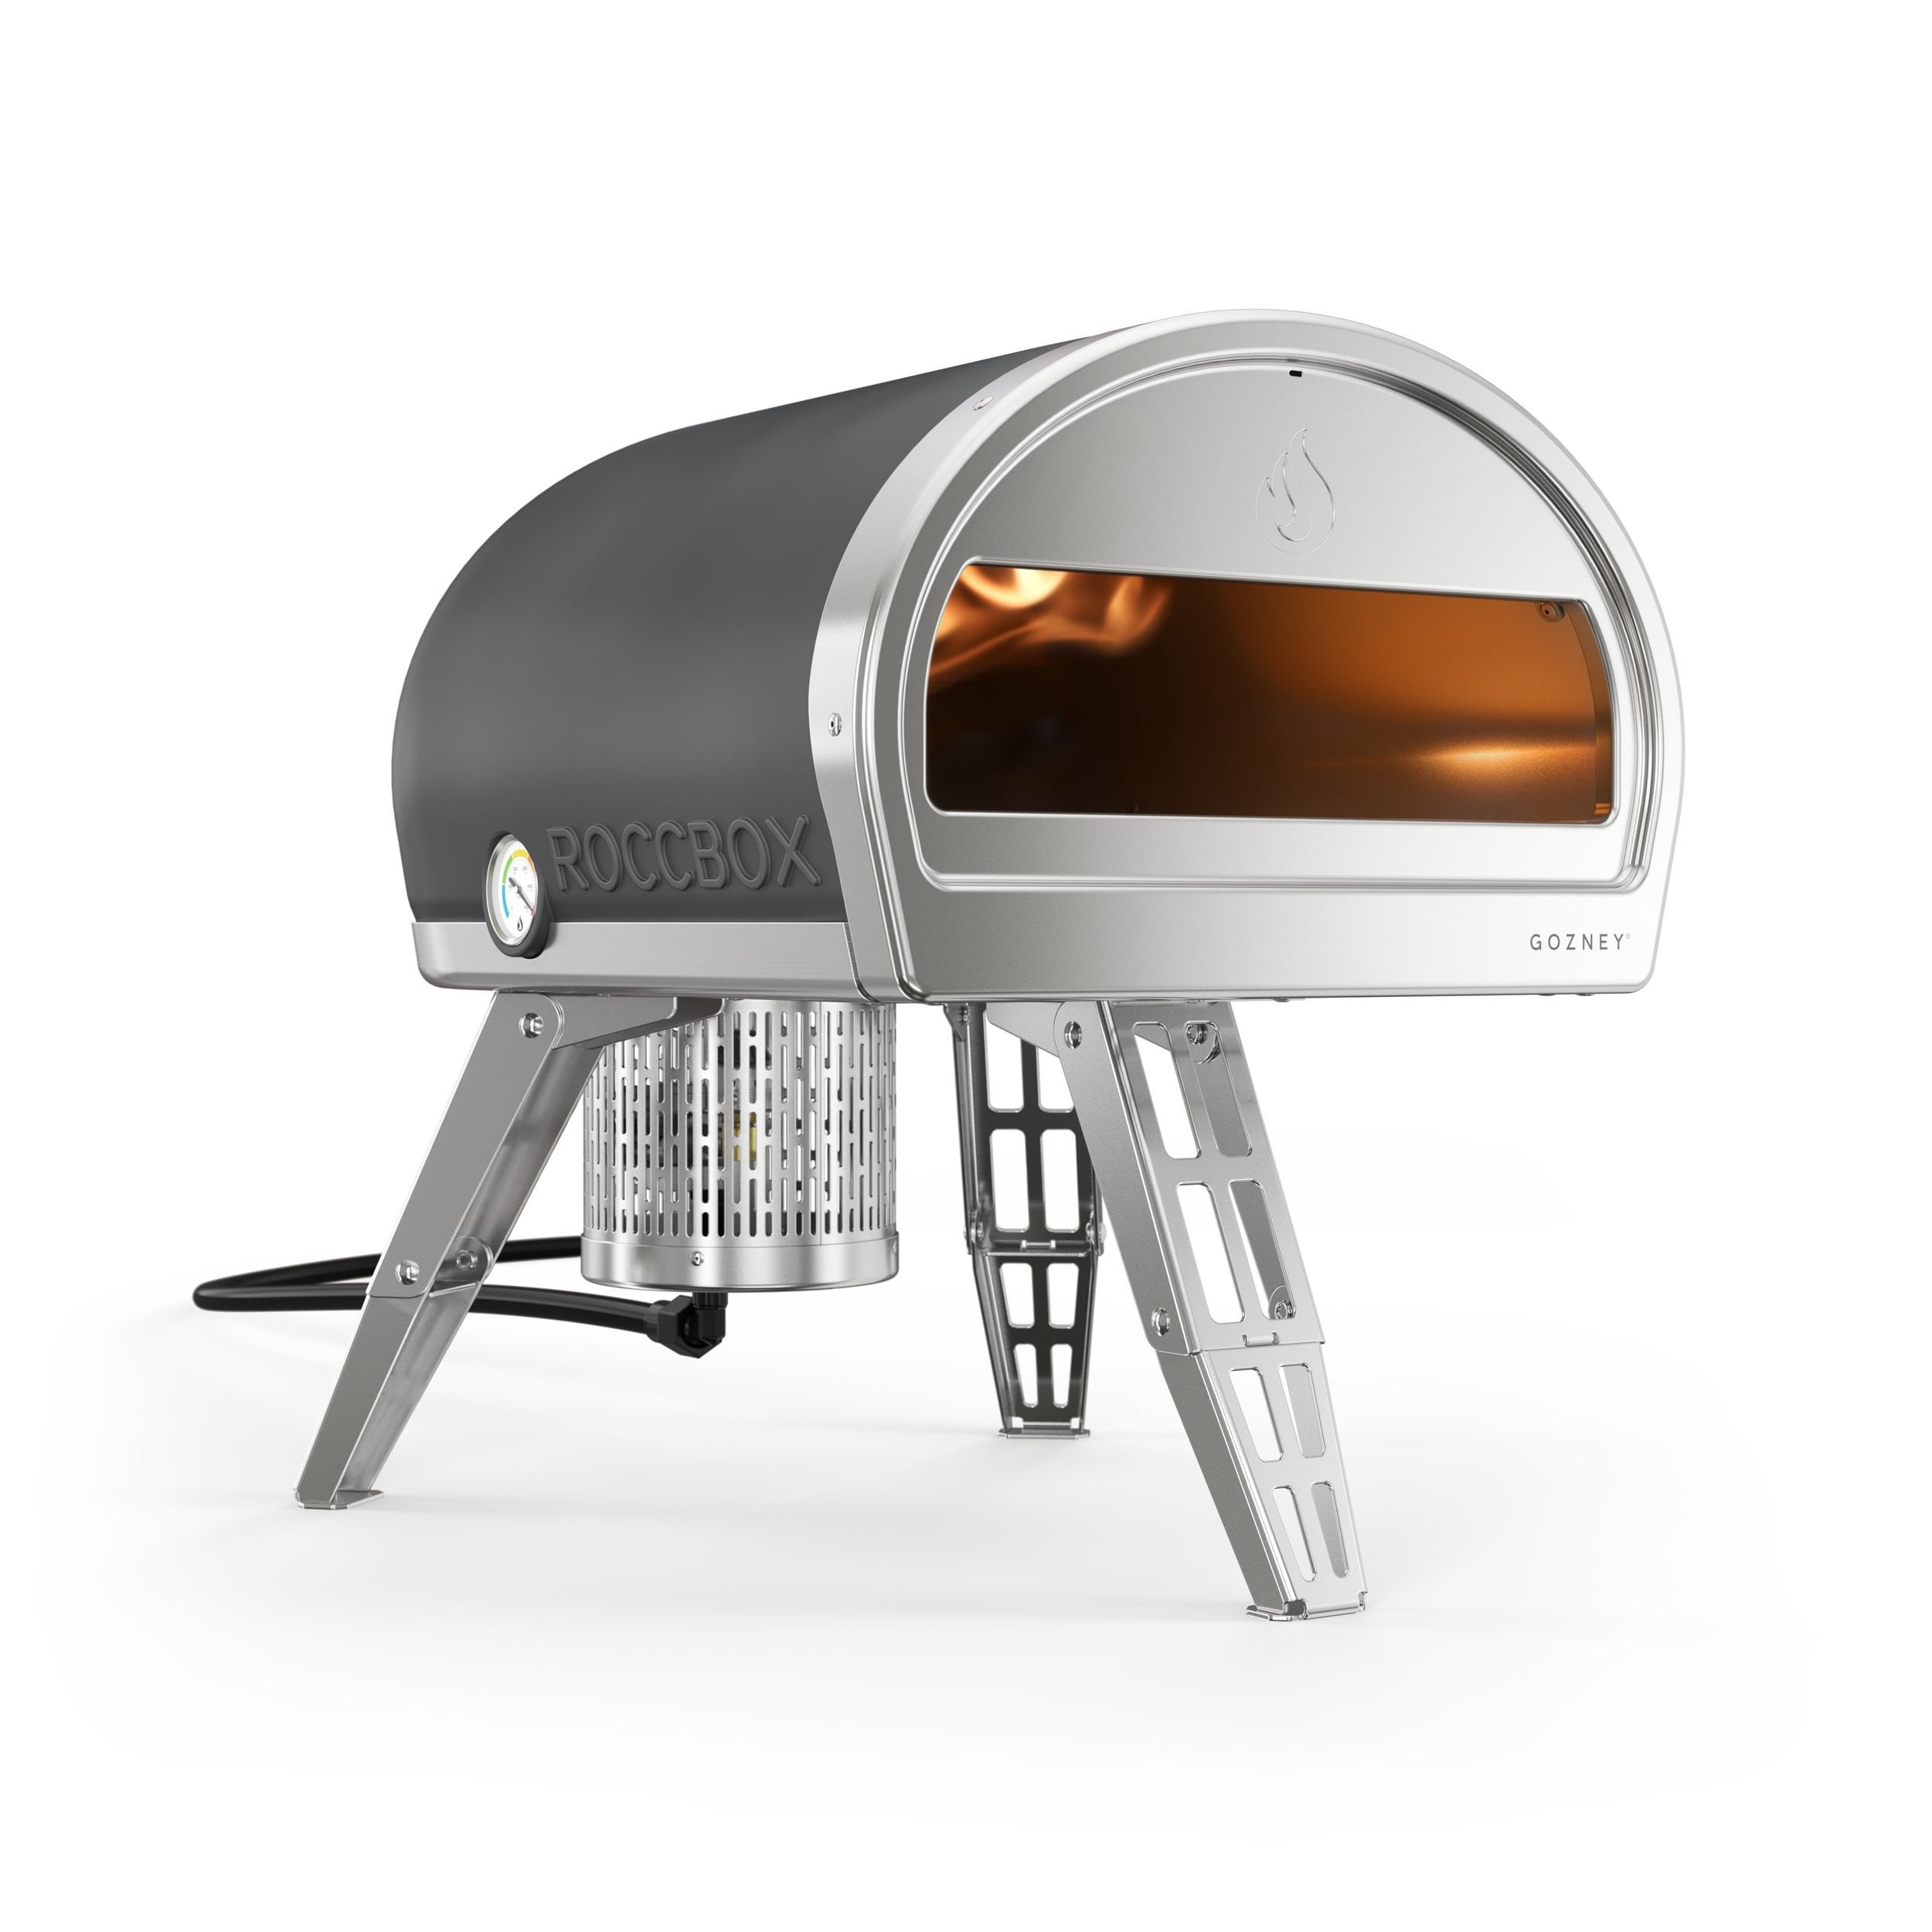 Roccbox Gas Burning Pizza Oven Gray